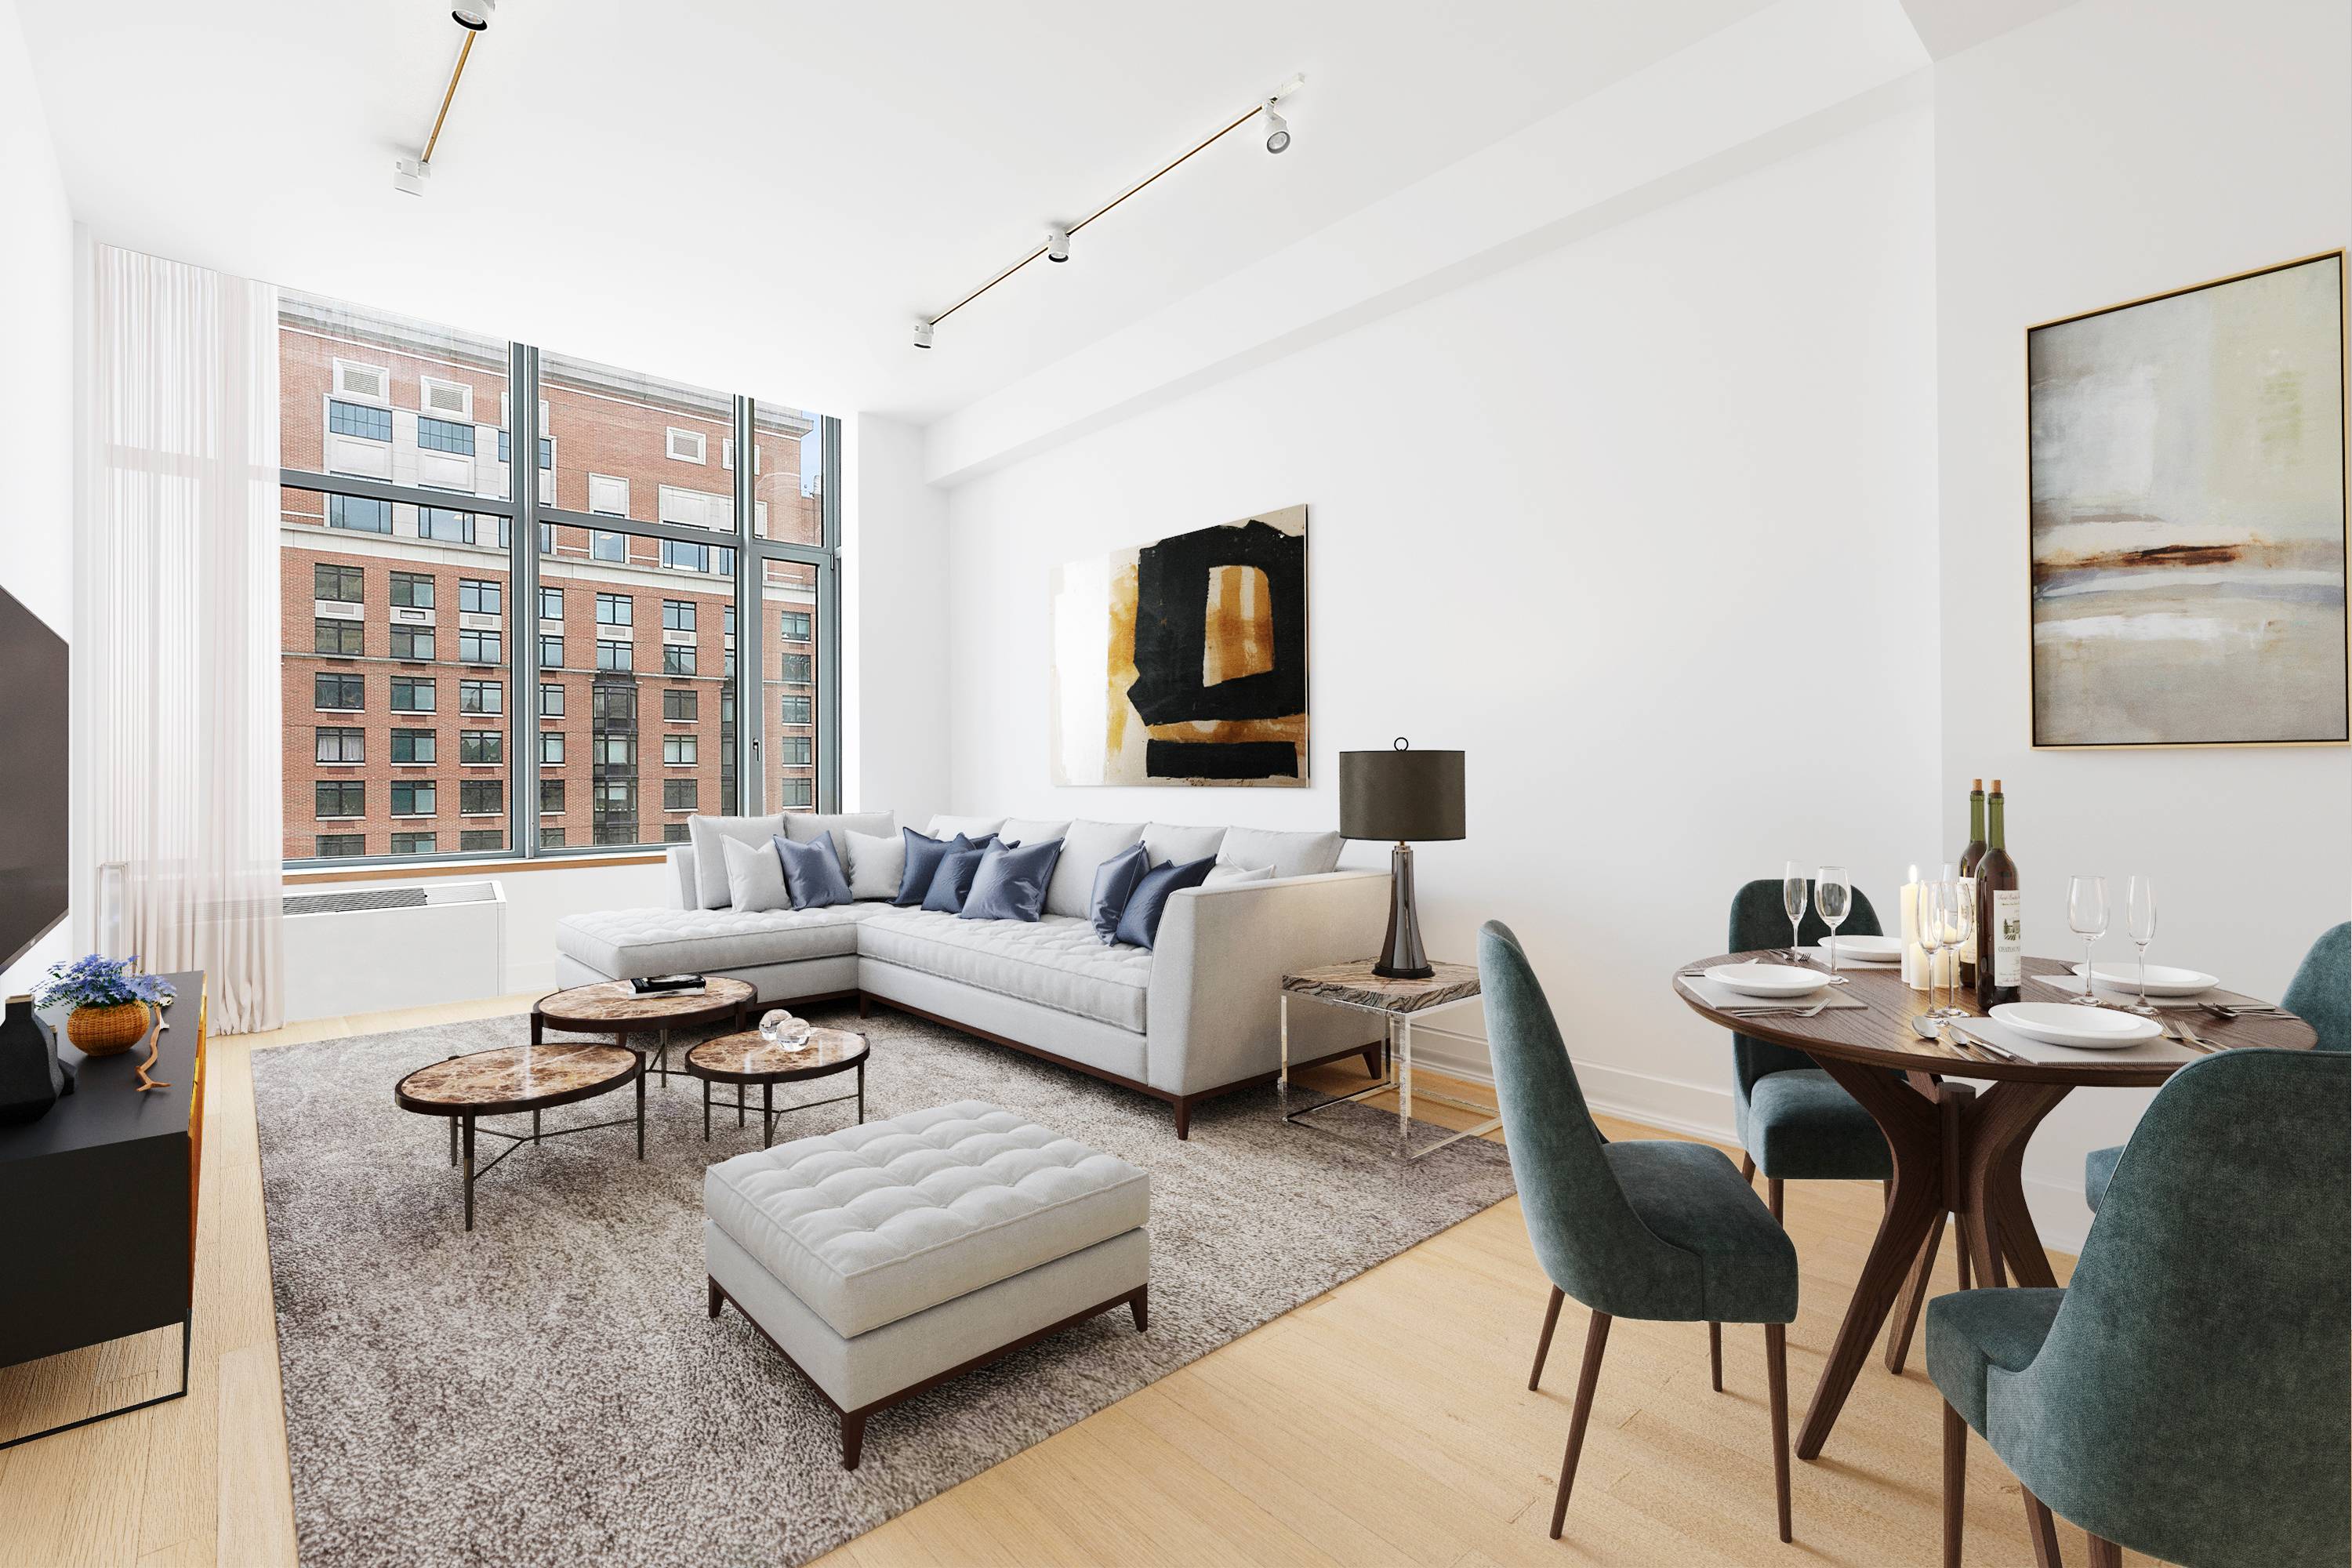 Meticulously designed amp ; luxuriously appointed, this south facing 2bed 2bath loft attracts with its bright open space complemented by approx.